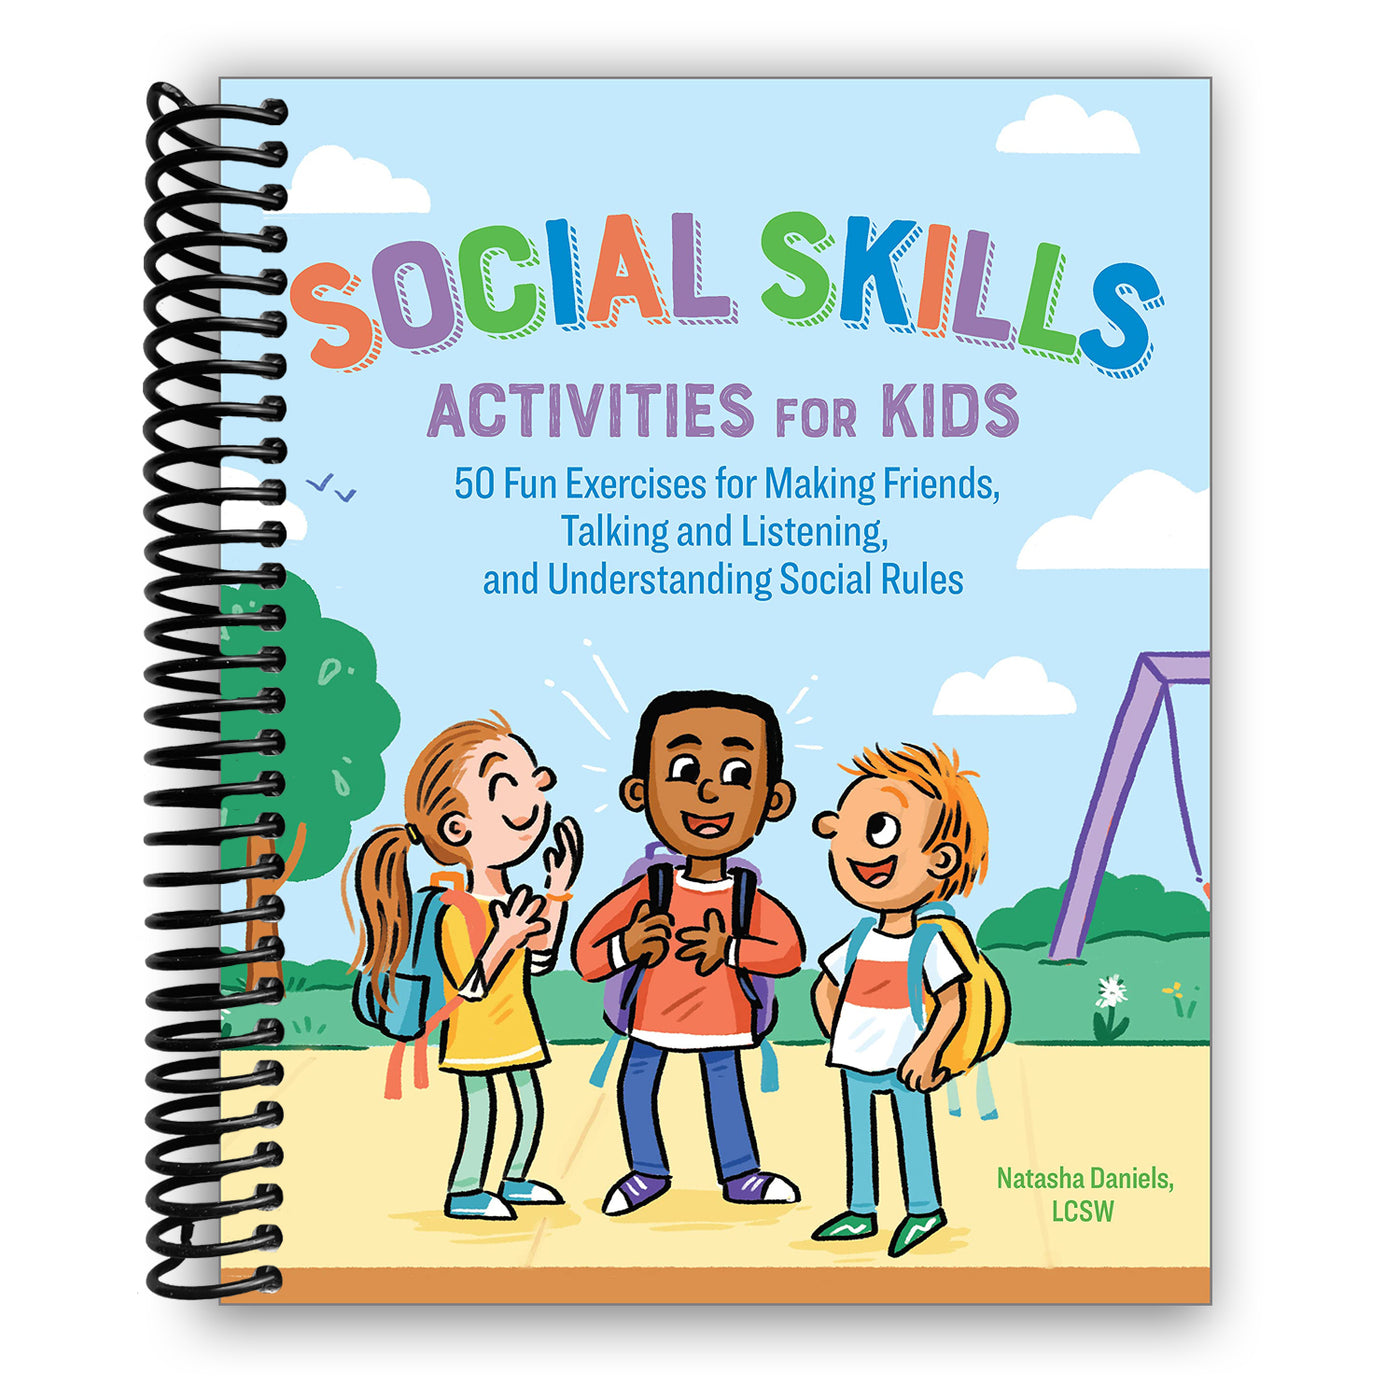 Social Skills Activities for Kids: 50 Fun Exercises for Making Friends, Talking and Listening, and Understanding Social Rules (Spiral Bound)